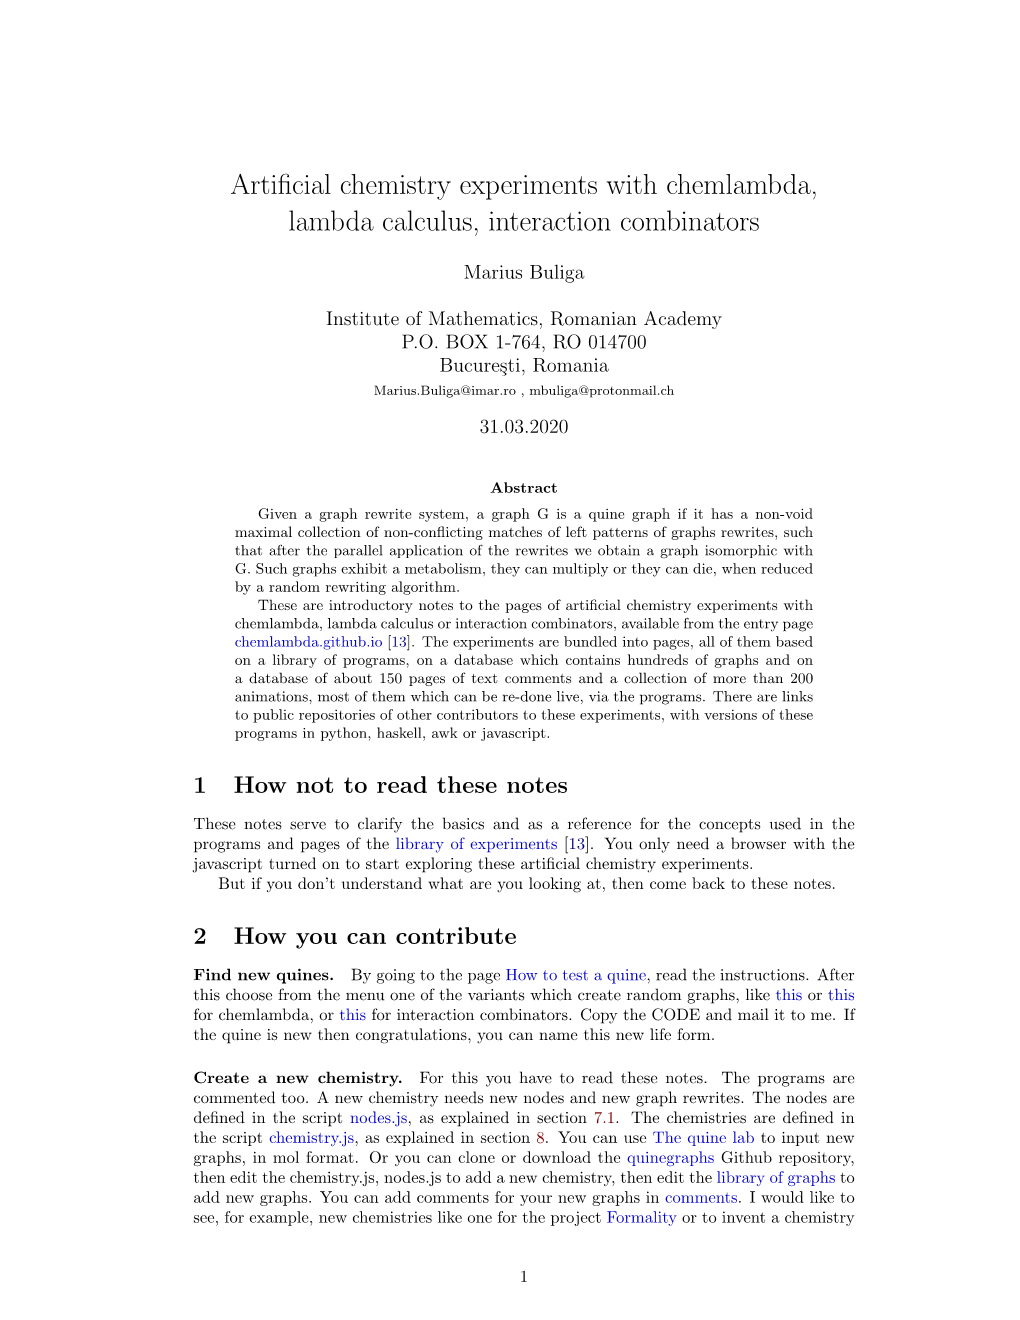 Artificial Chemistry Experiments with Chemlambda